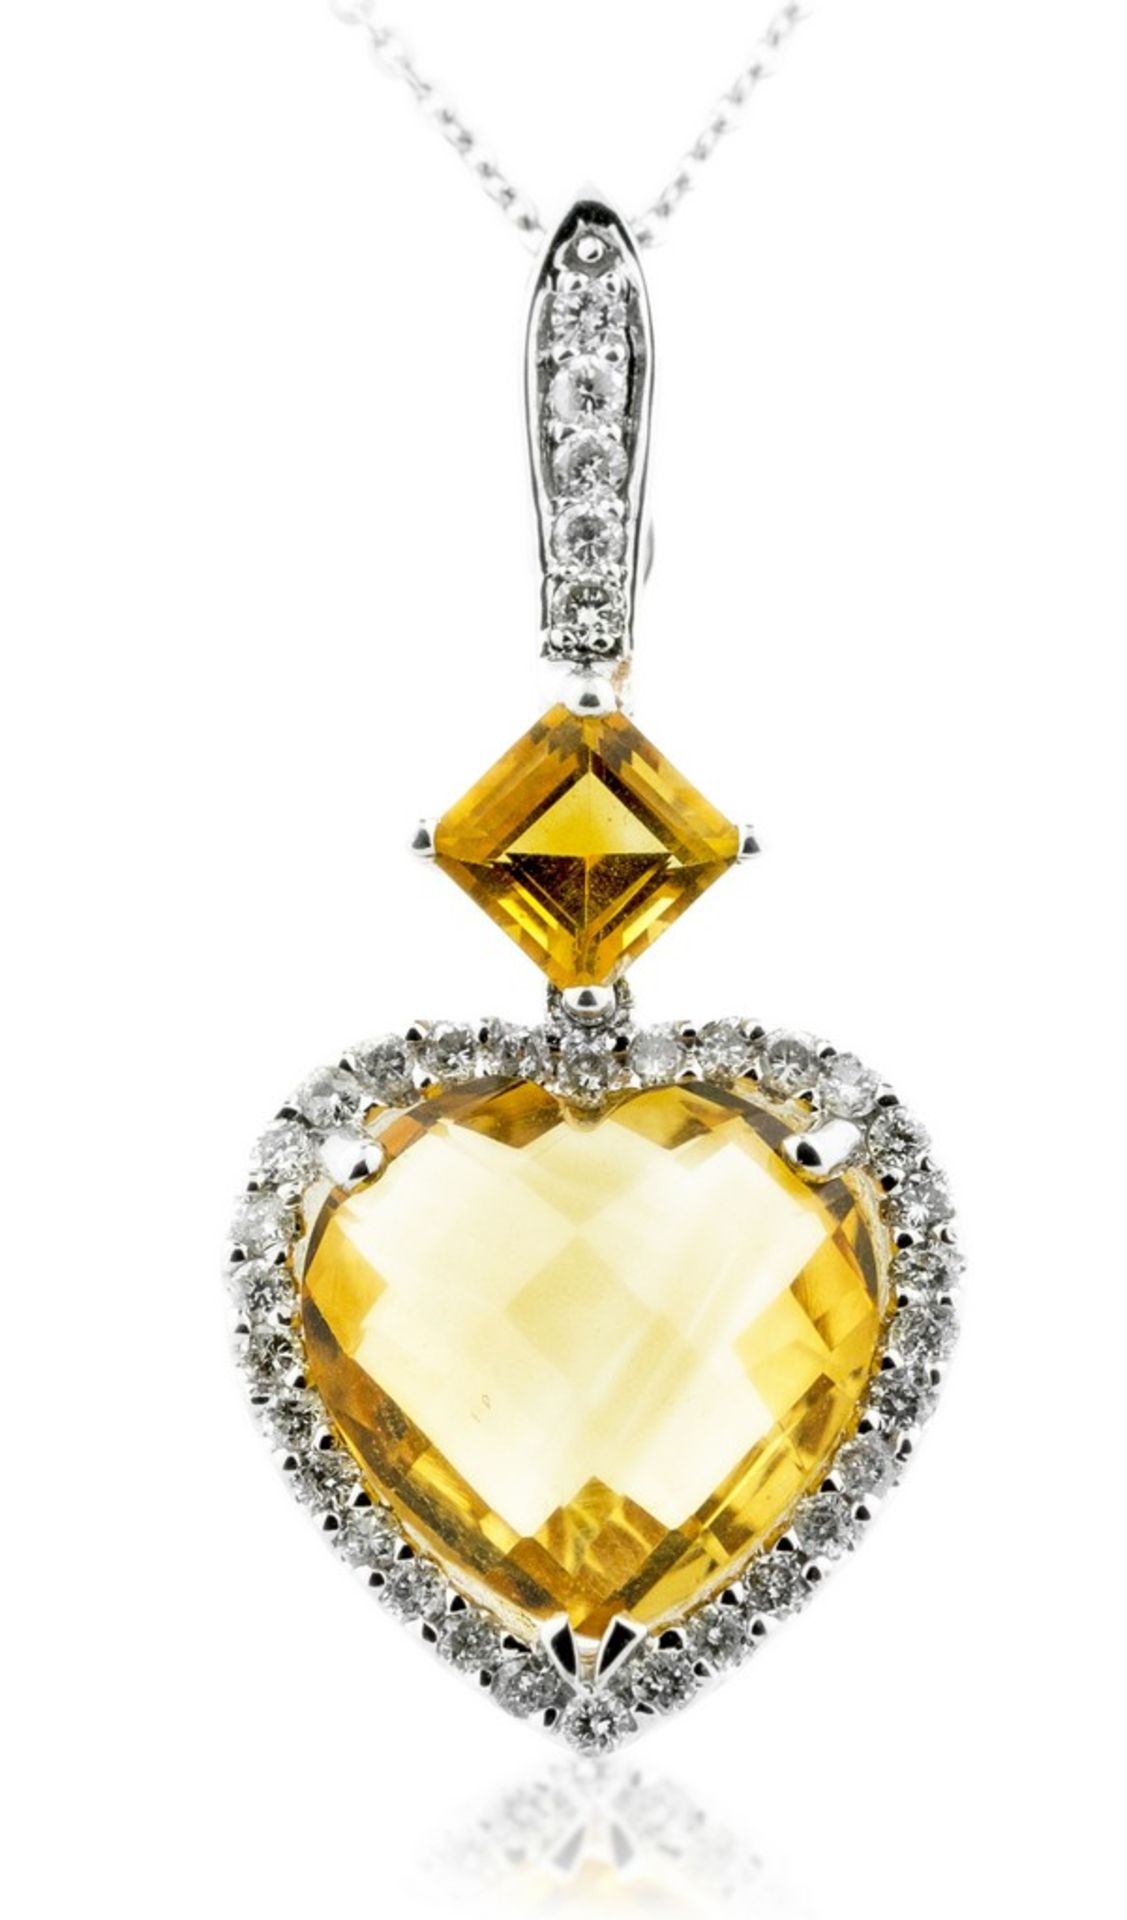 CITRINE AND DIAMOND PENDANT-NECKLACE Suspending a pendant set with a heart-shaped citrine and a